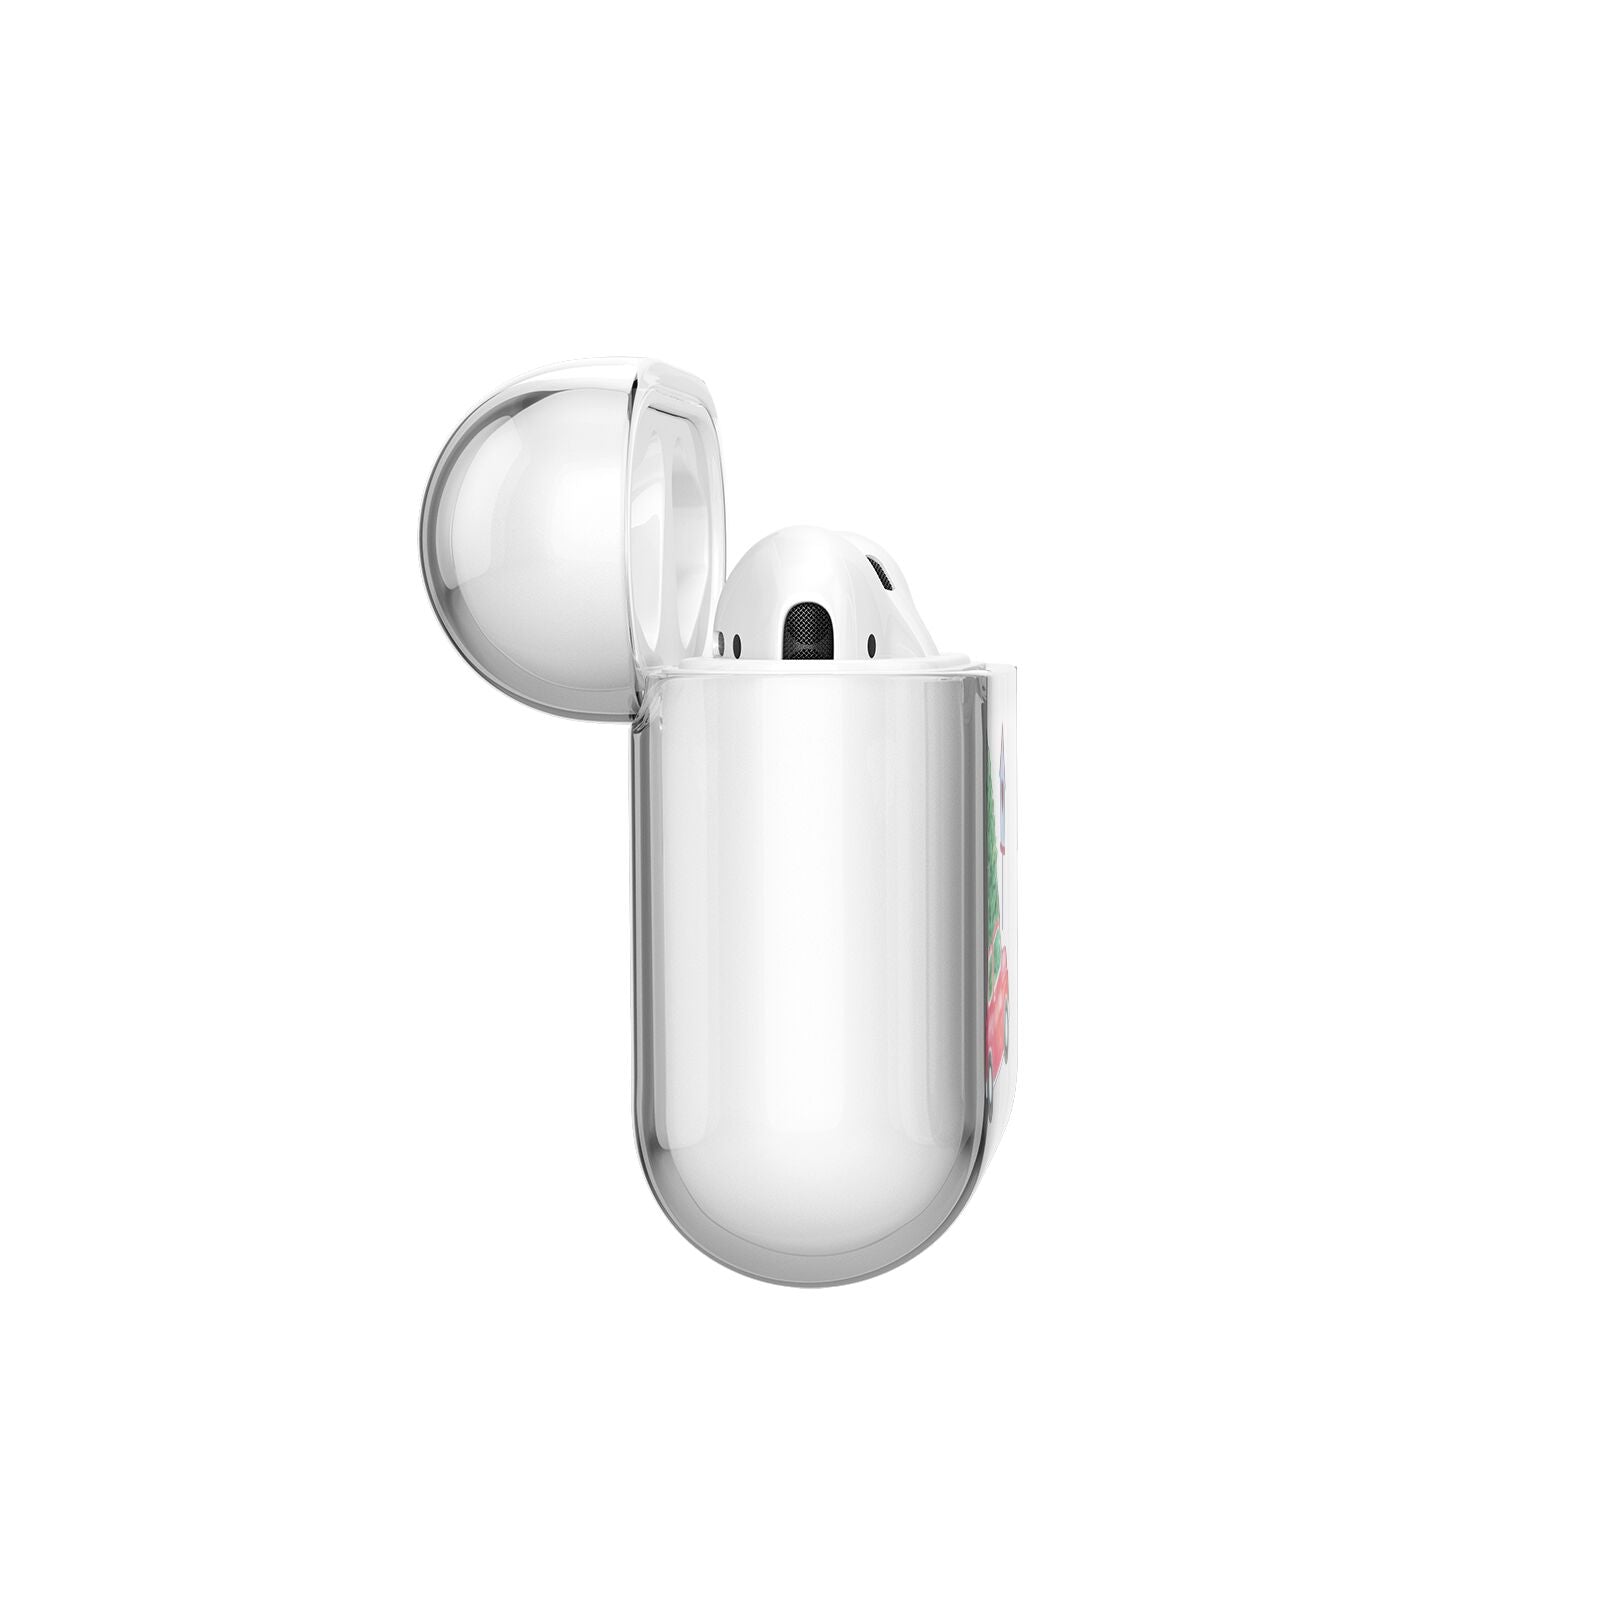 Driving home for Christmas AirPods Case Side Angle